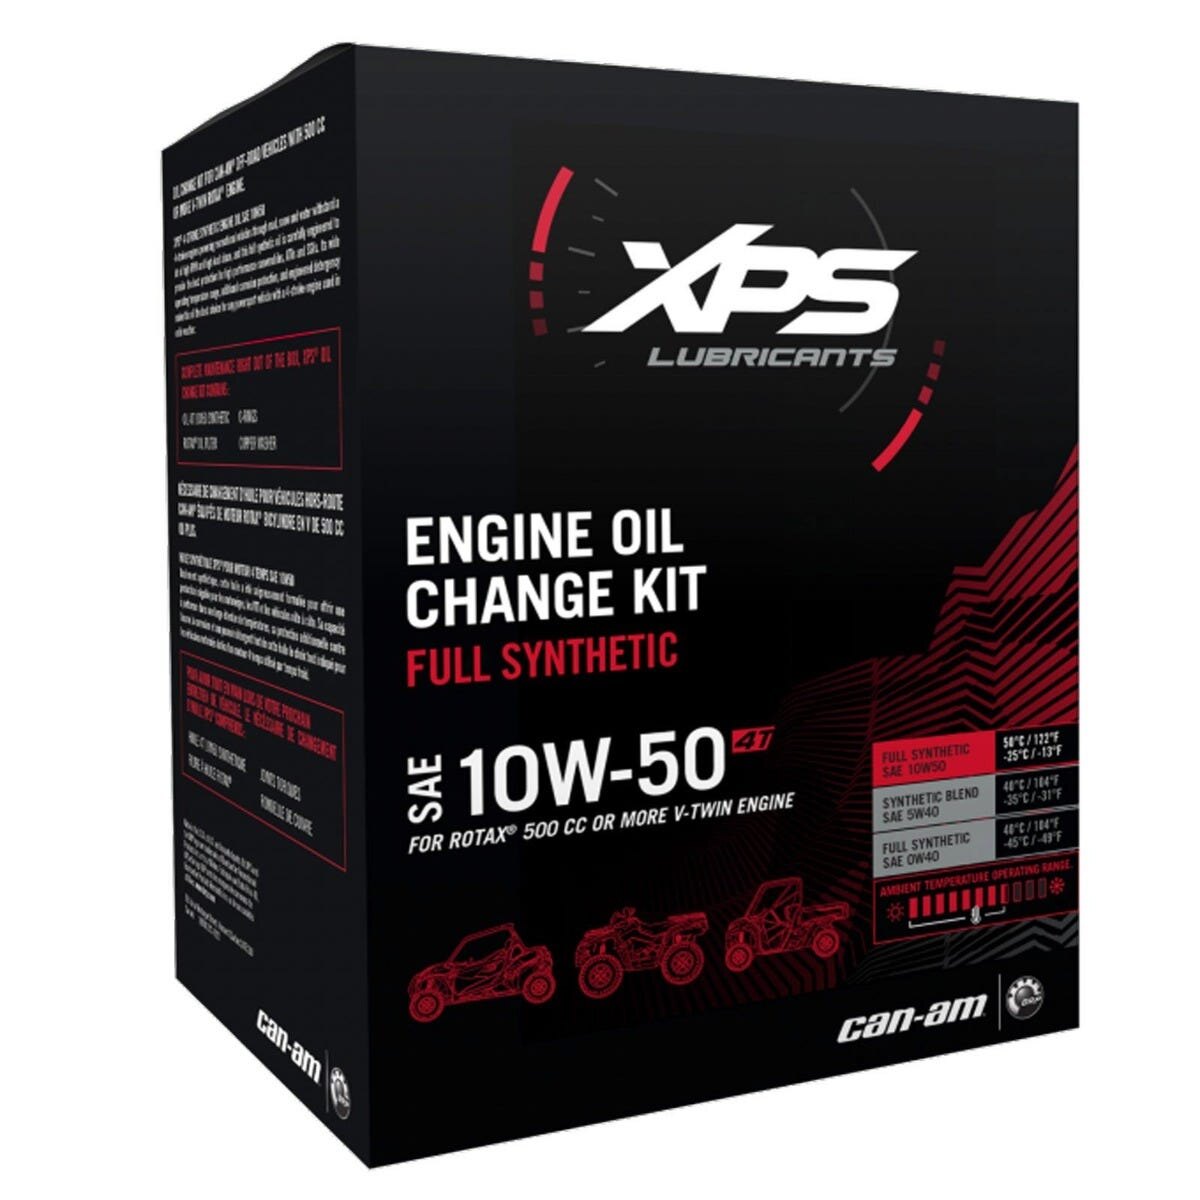 10W 50 Synthetic Oil Change Kit for Can Am ATV/SSV Rotax 500 cc or Greater V Twin Engines